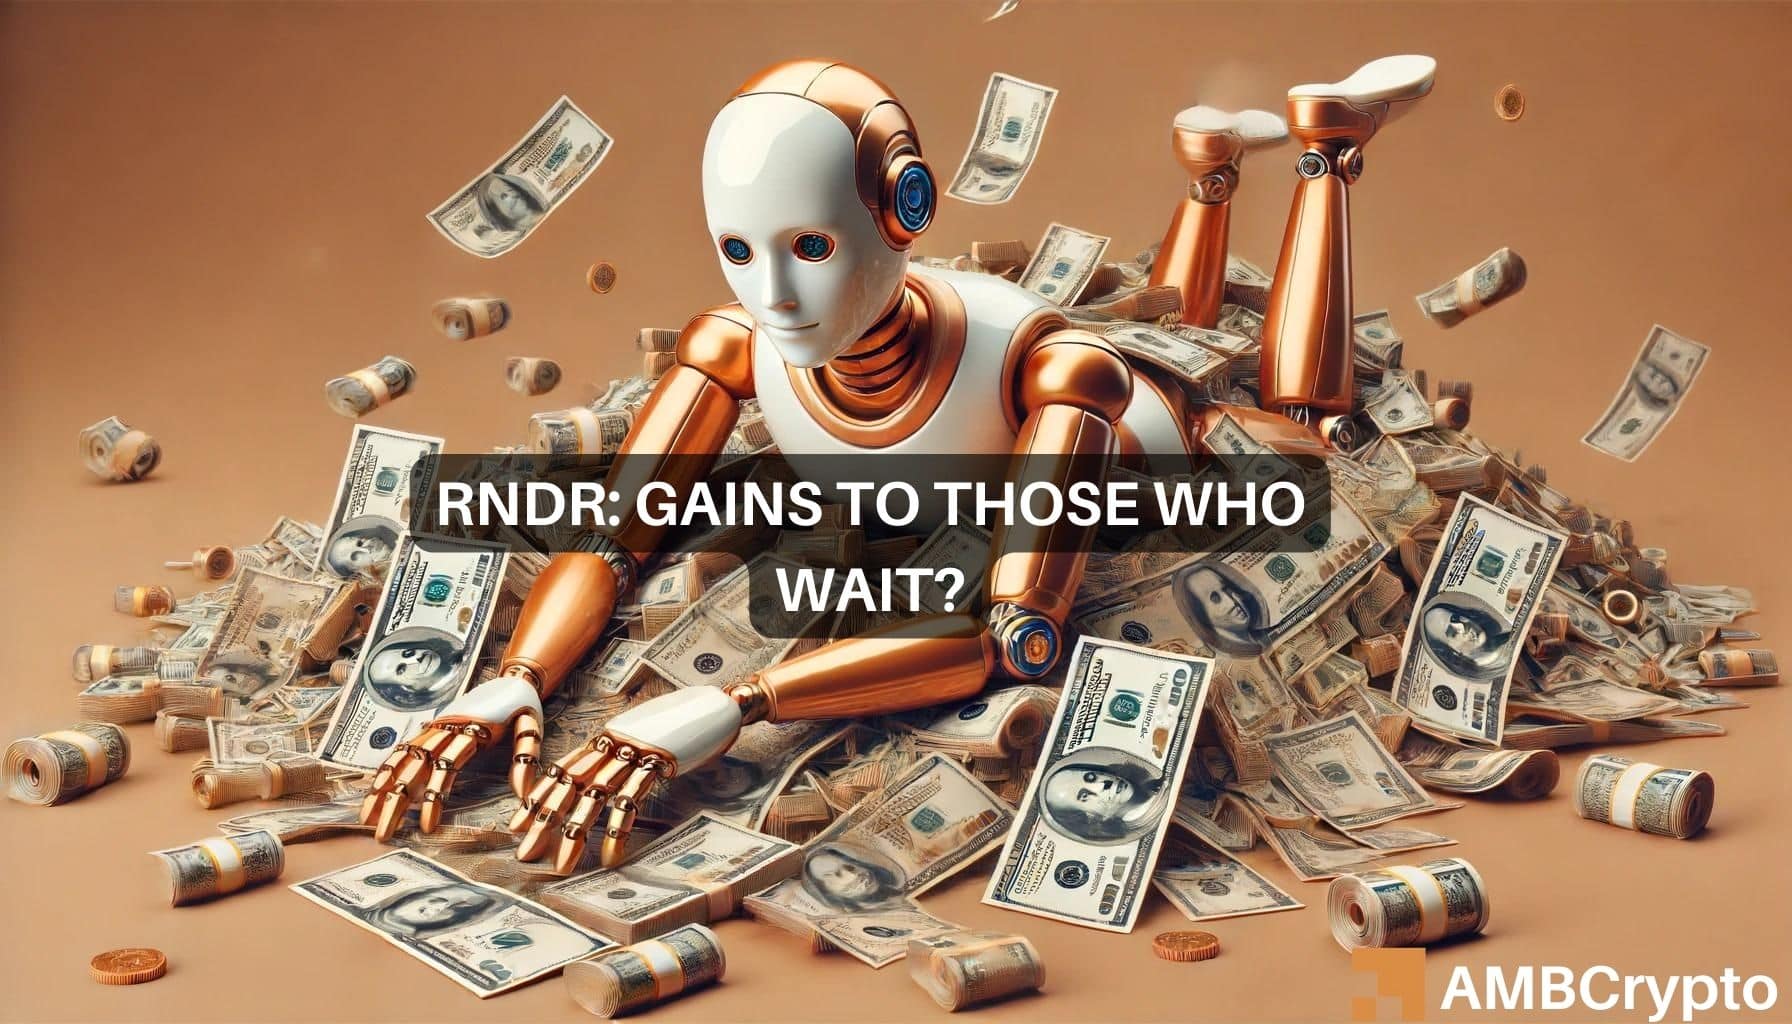 Render [RNDR] falls 13% in 7 days: Will the AI token gain soon?